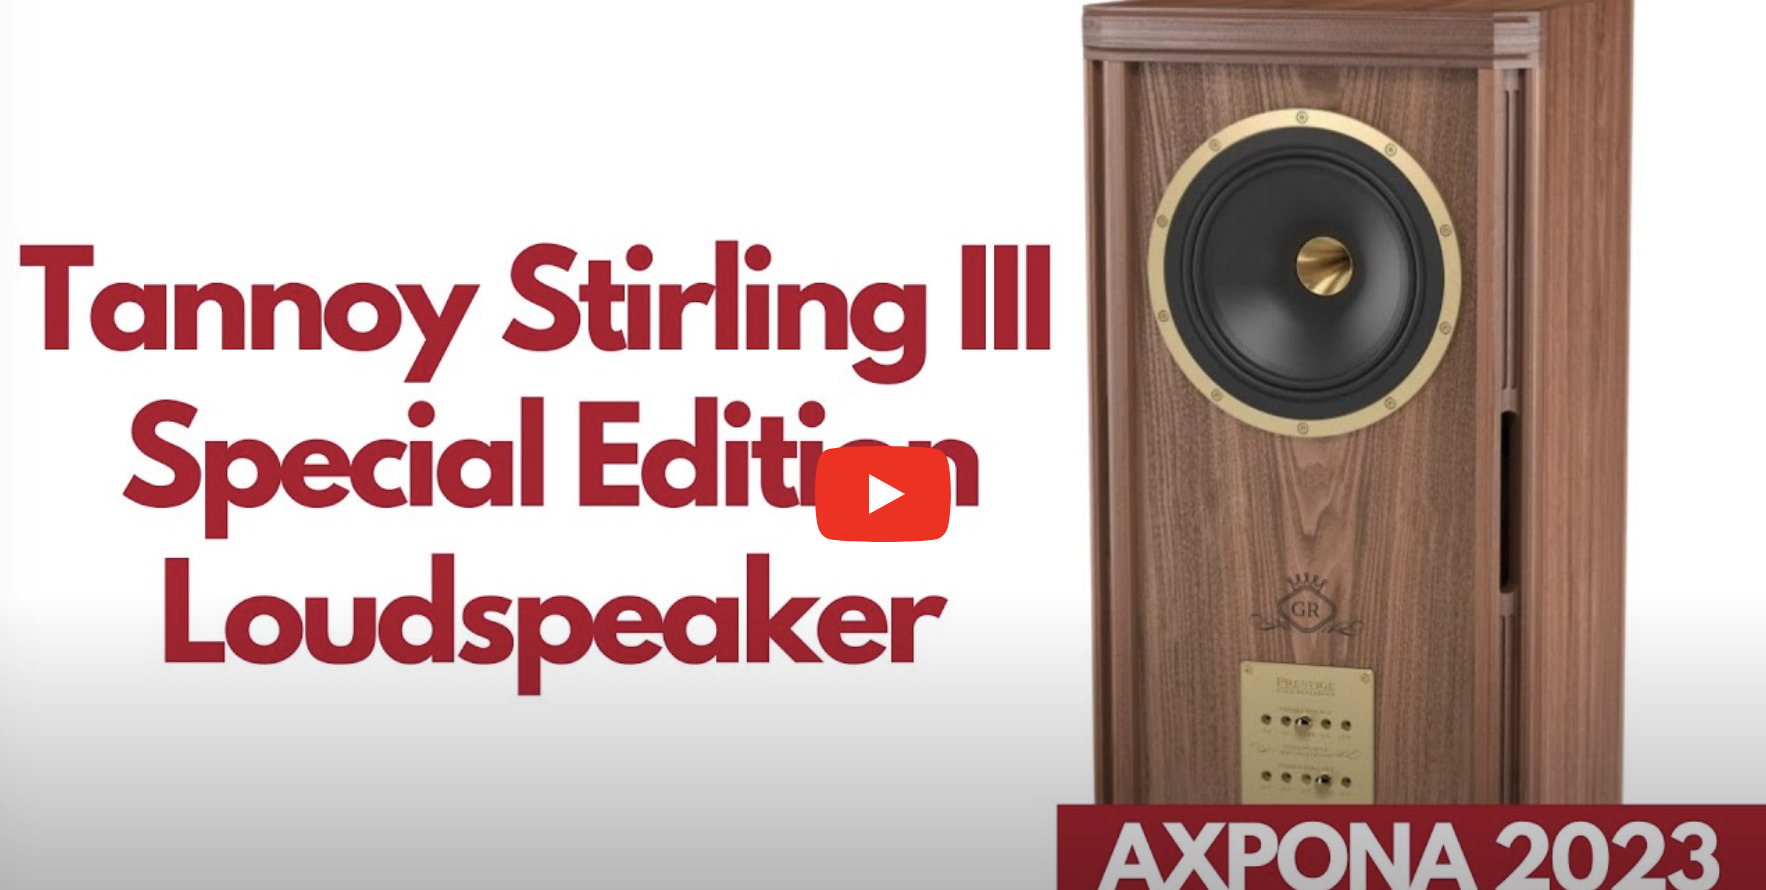 Classic Dual Concentric Design REINVENTED | The Tannoy Stirling III LZ Loudspeaker